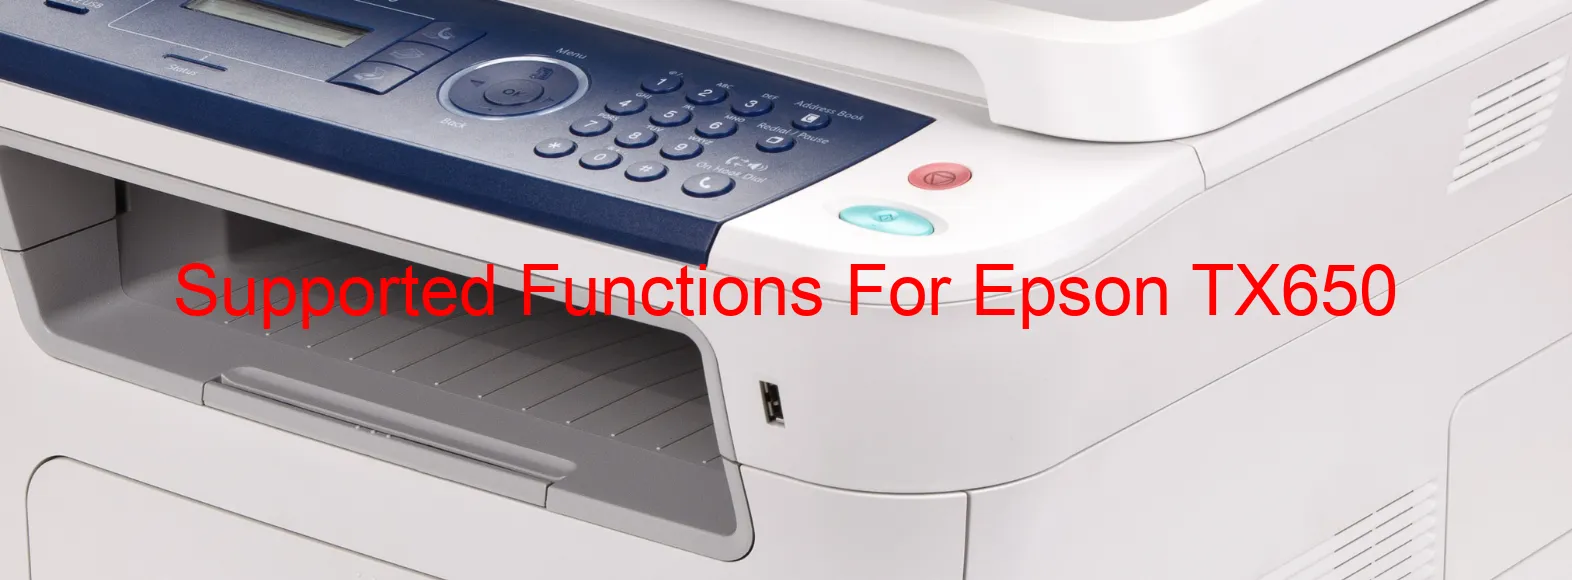 supported-functions-for-epson-tx650.webp